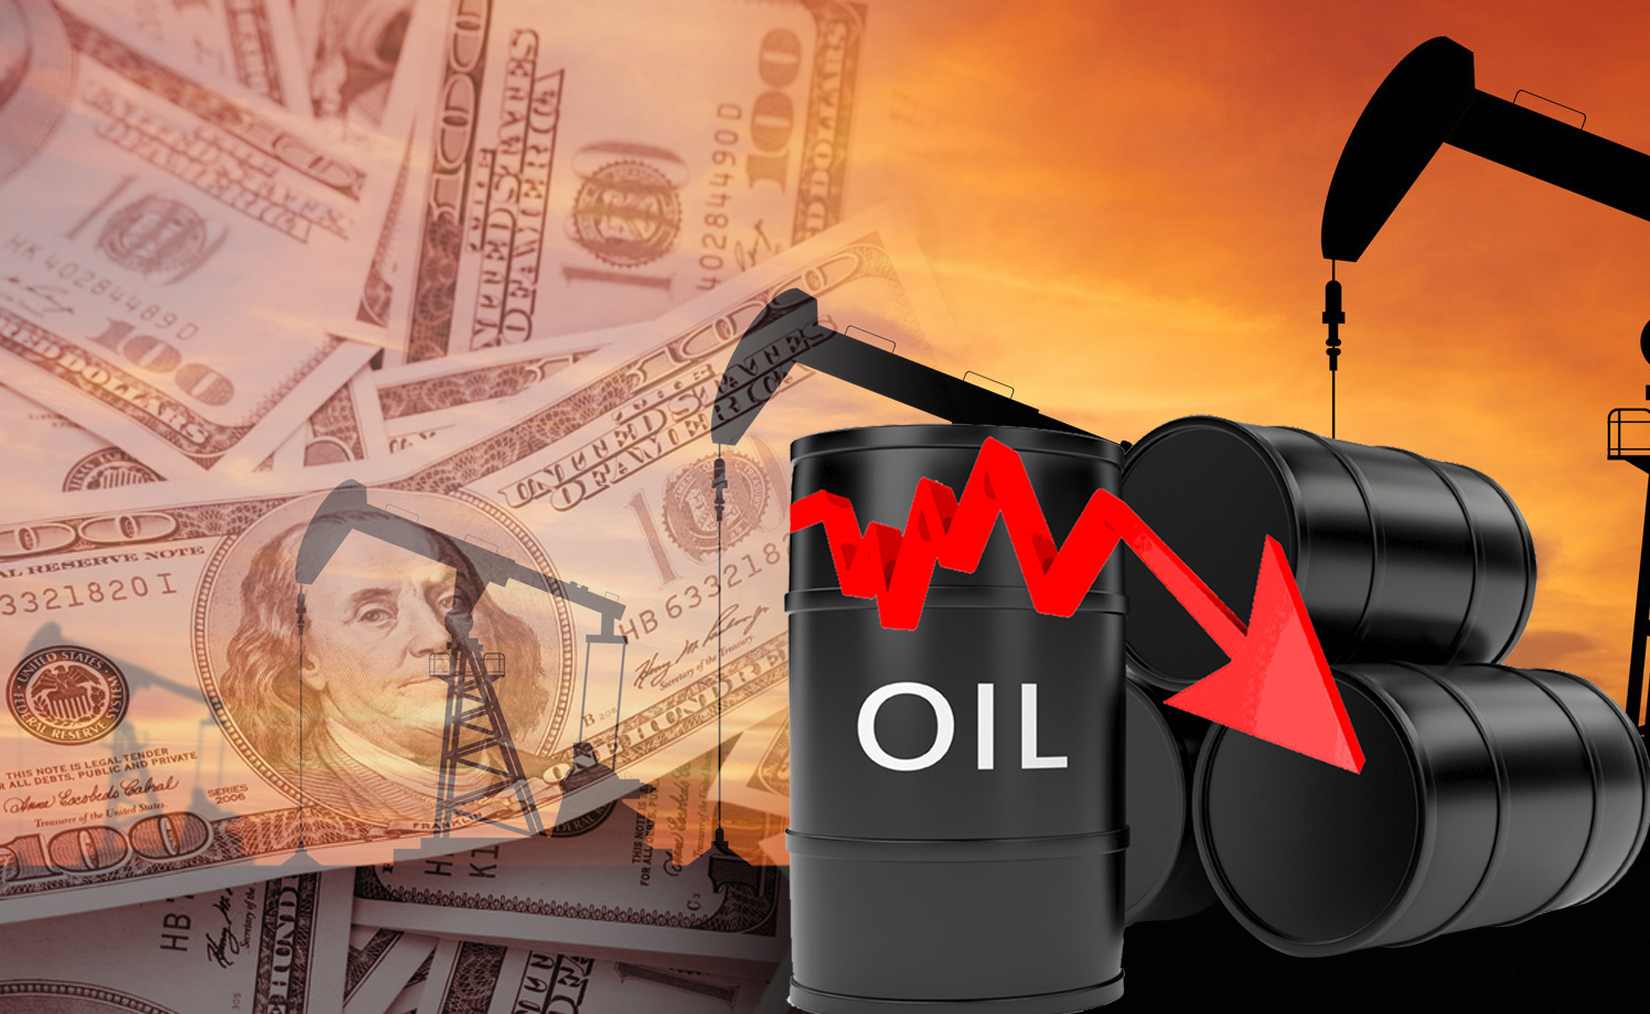 Kuwait oil price down 70 cents to USD 66.80                                                                                                                                                                                                               